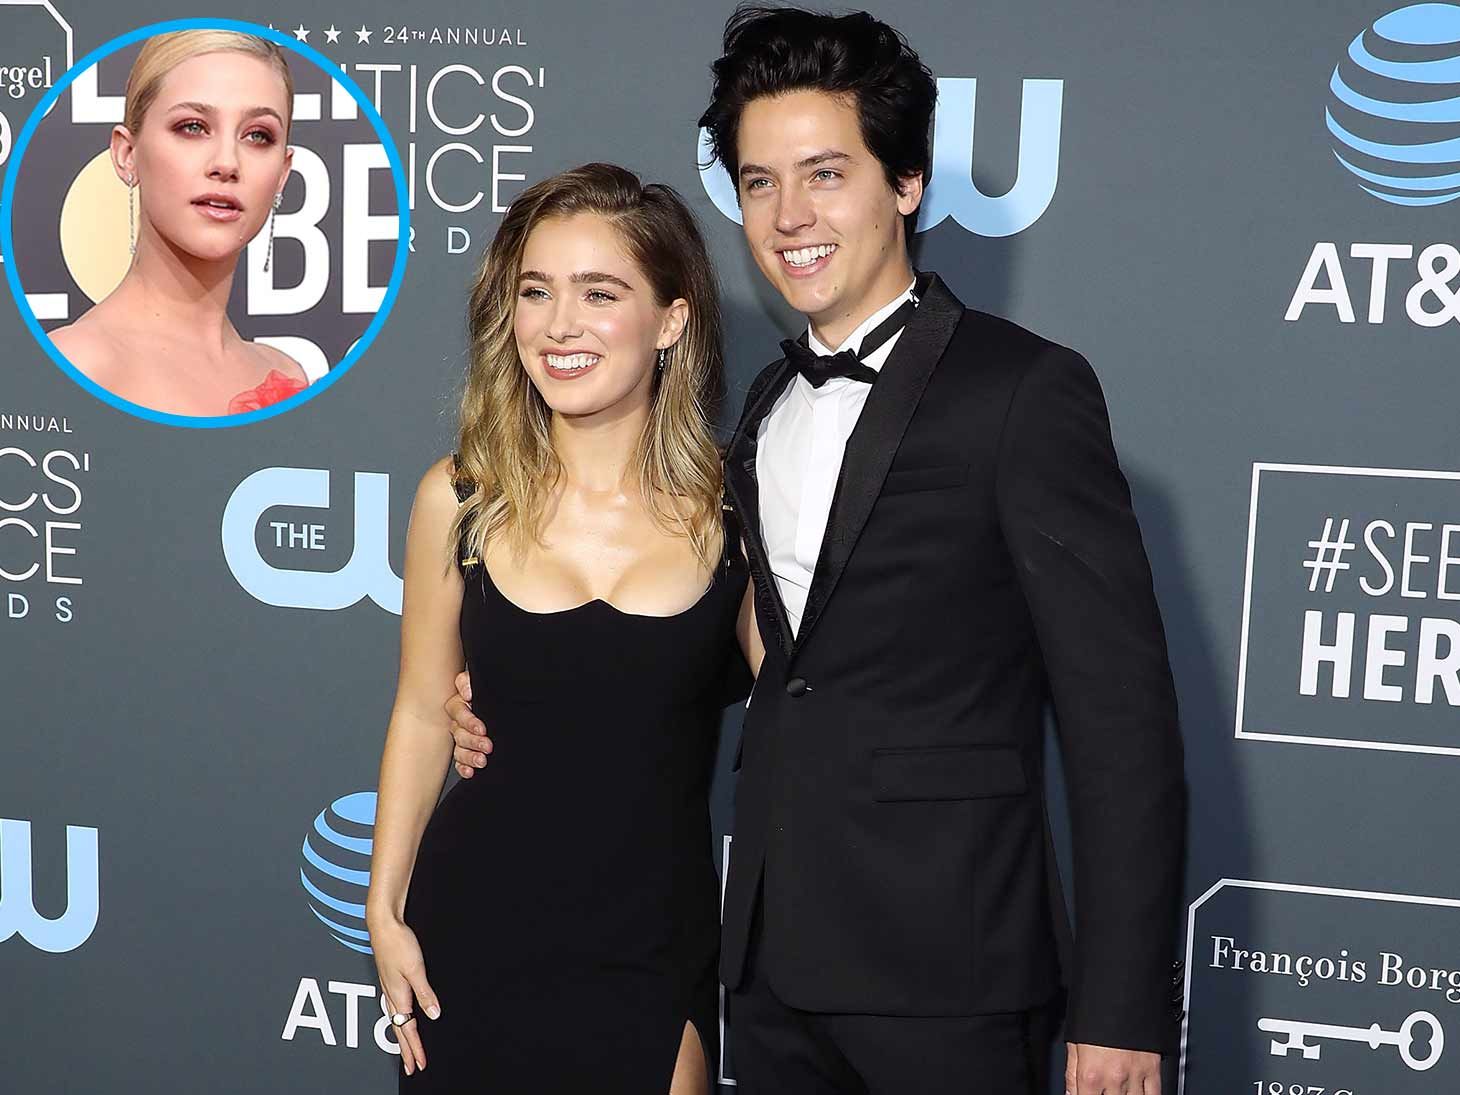 Lili Reinhart Watches on as Cole Sprouse Raises Eyebrows With Haley Lu Rich...